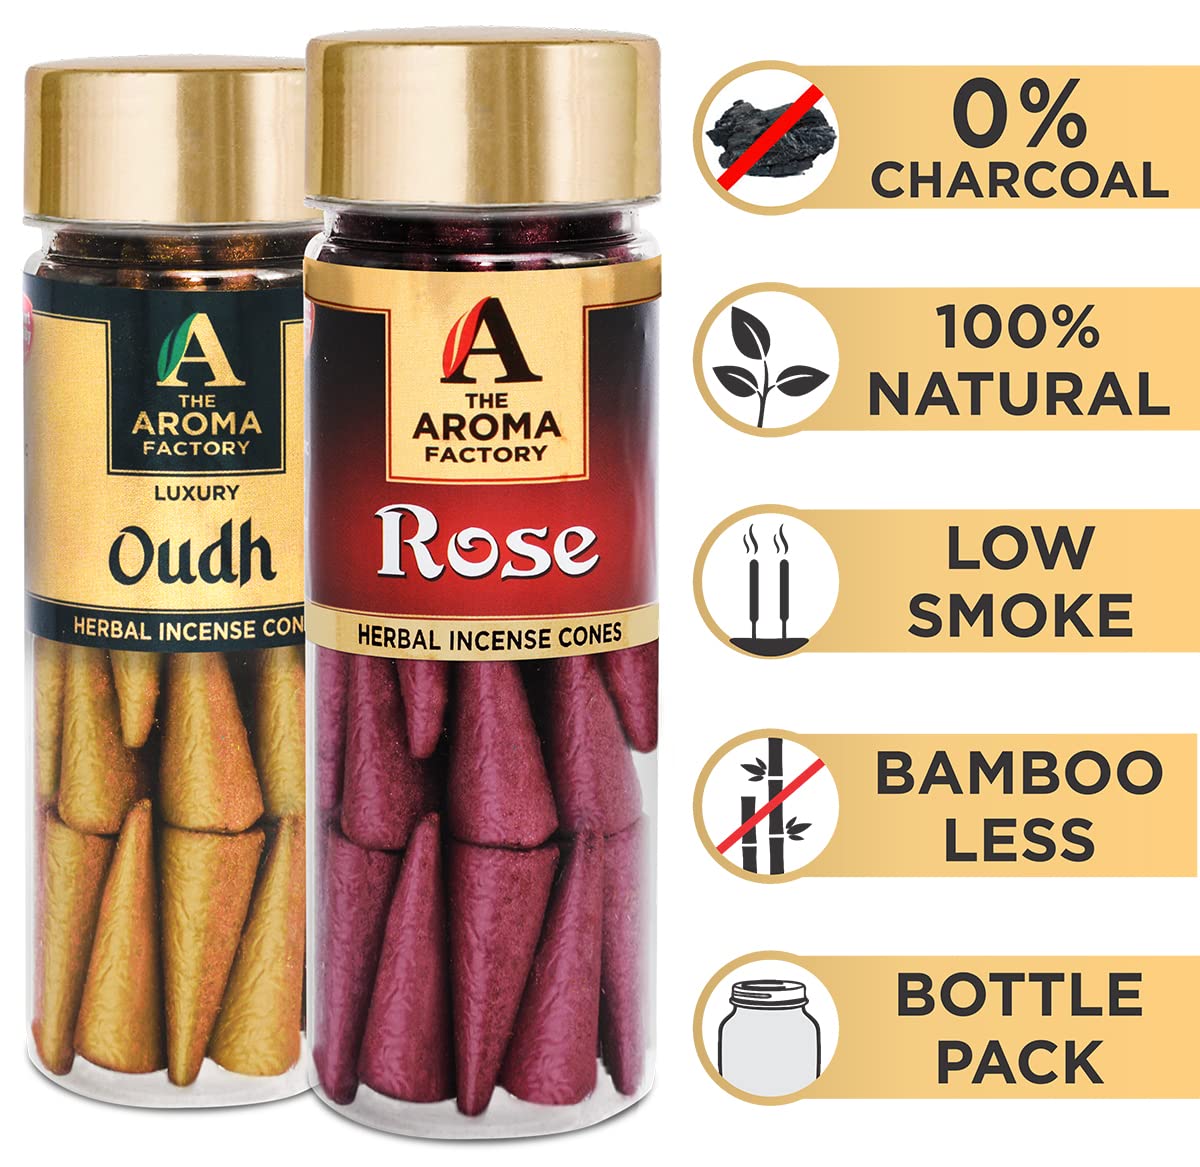 The Aroma Factory Incense Dhoop Cone for Pooja, Oudh & Rose (100% Herbal & 0% Charcoal) 2 Bottles x 30 Cones